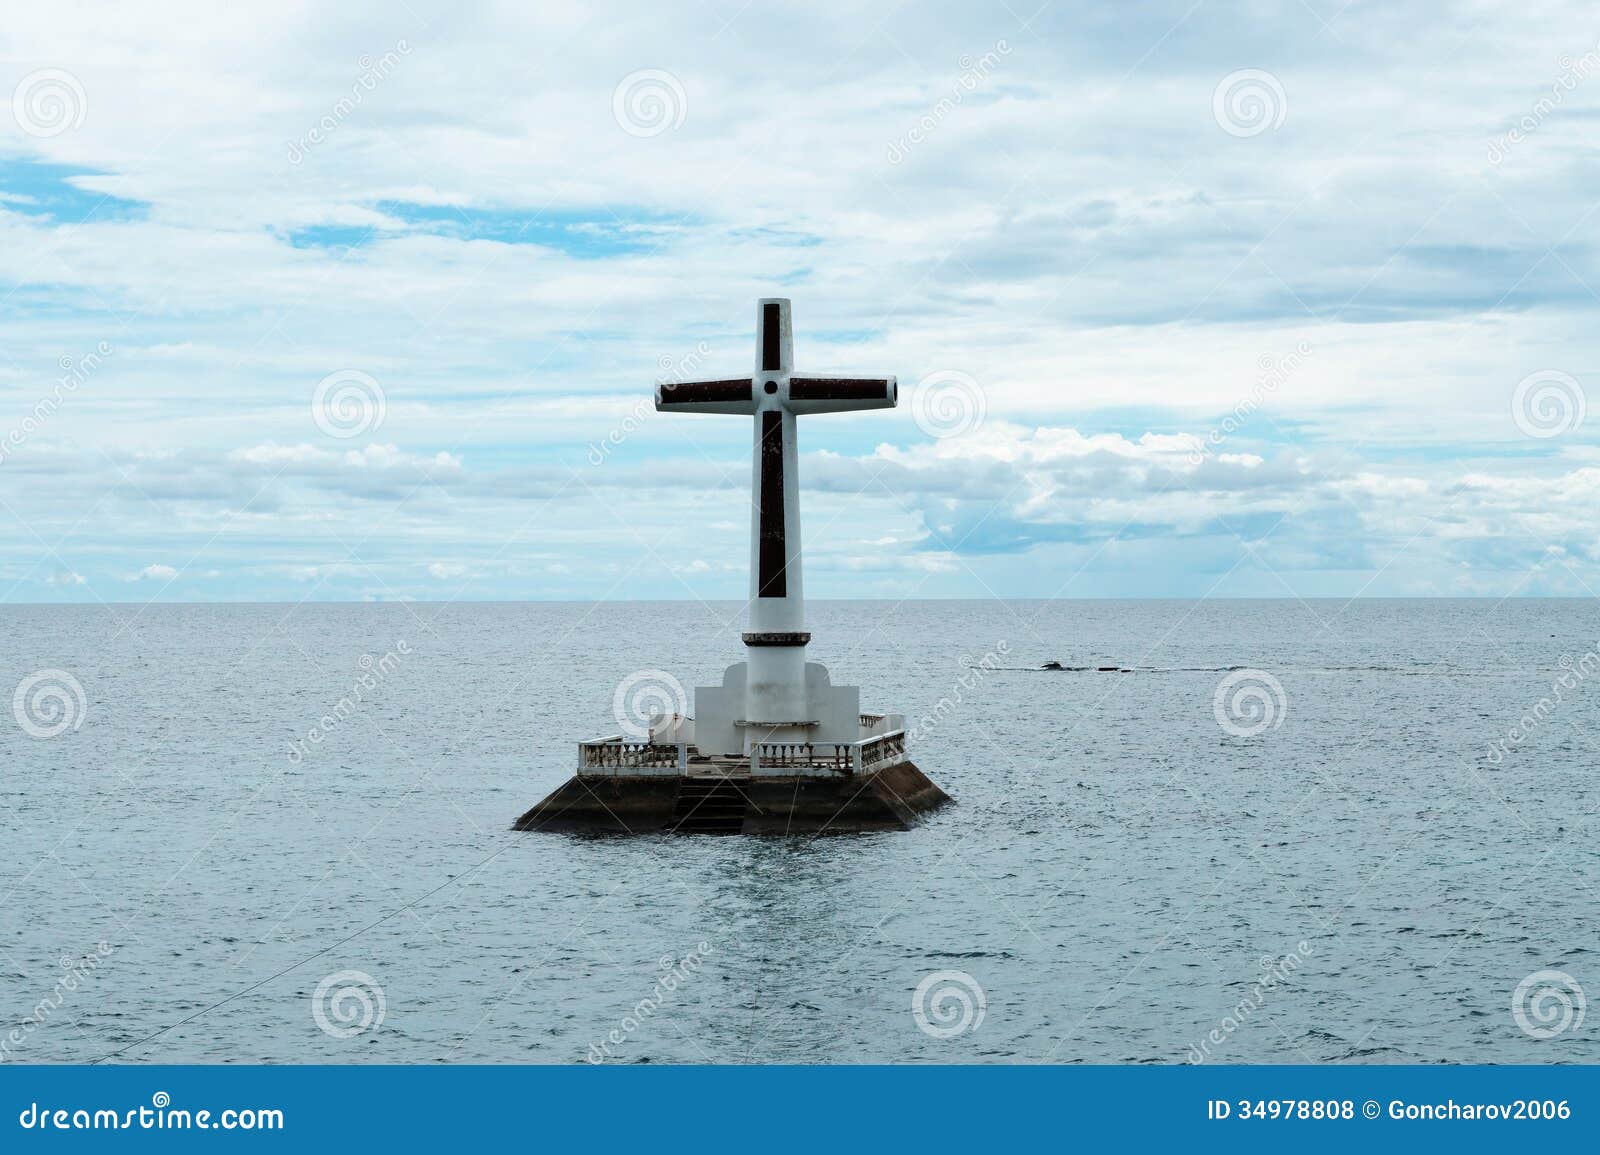 floating cross at the sunken cemetery, philippines